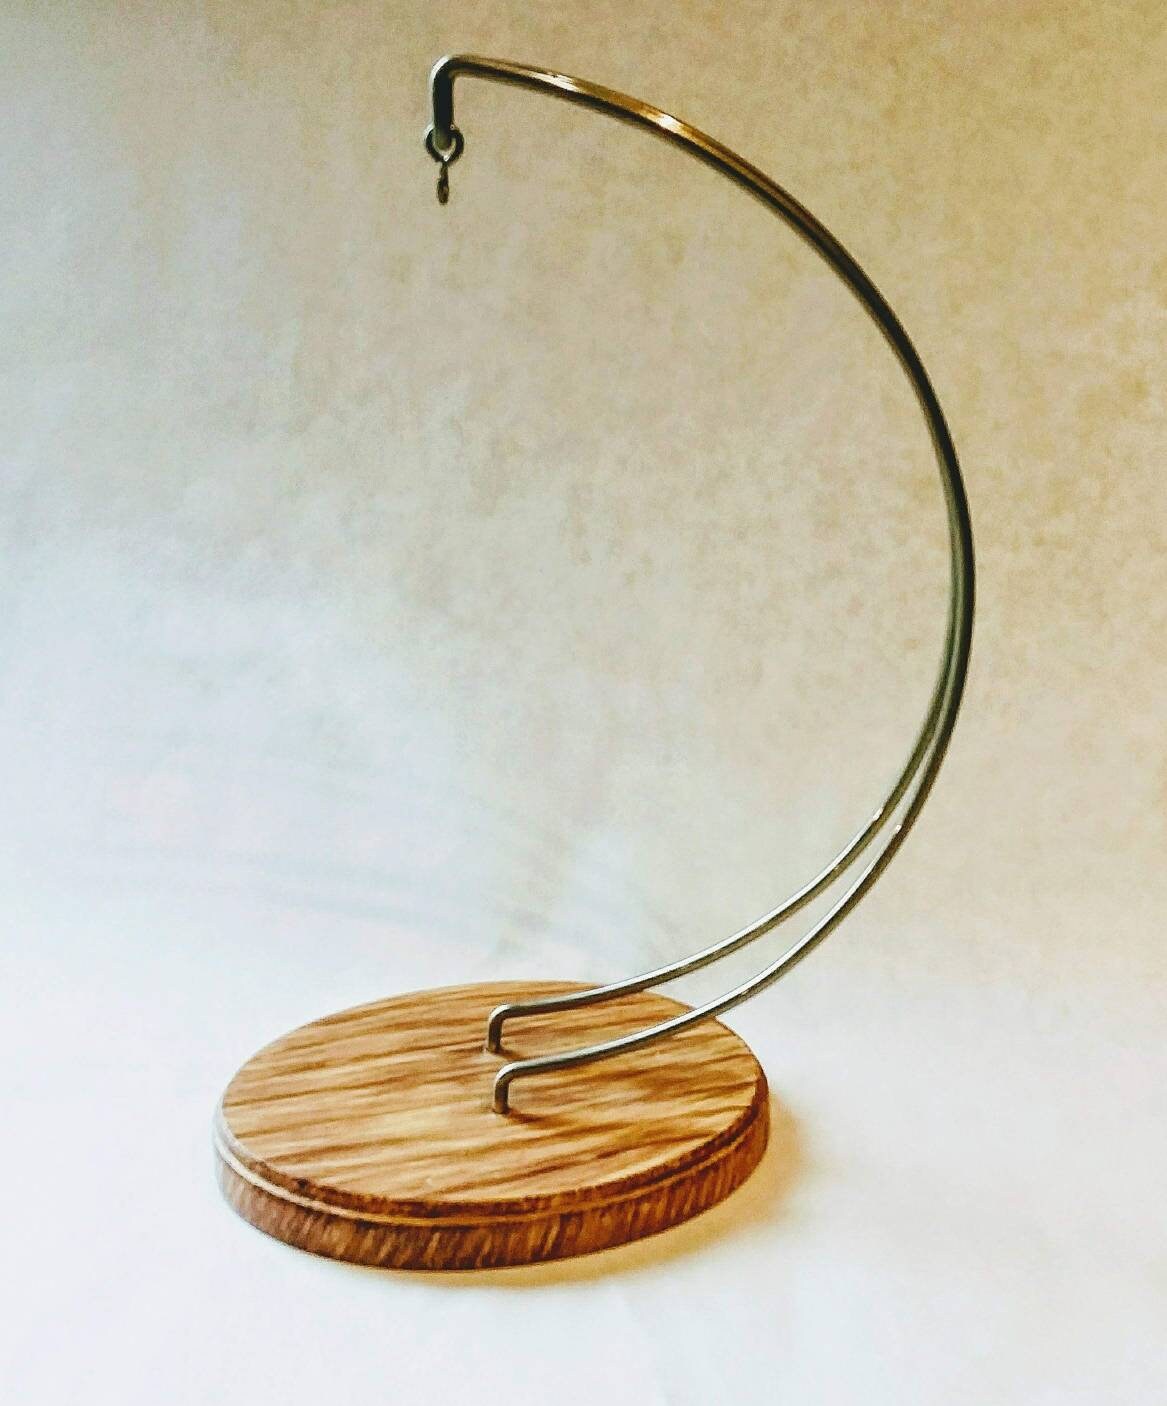 Ornament holder. Display stand for stained glass. Hang blown glass or suncatchers. Paintable with sturdy base. Terrarium globe stand.